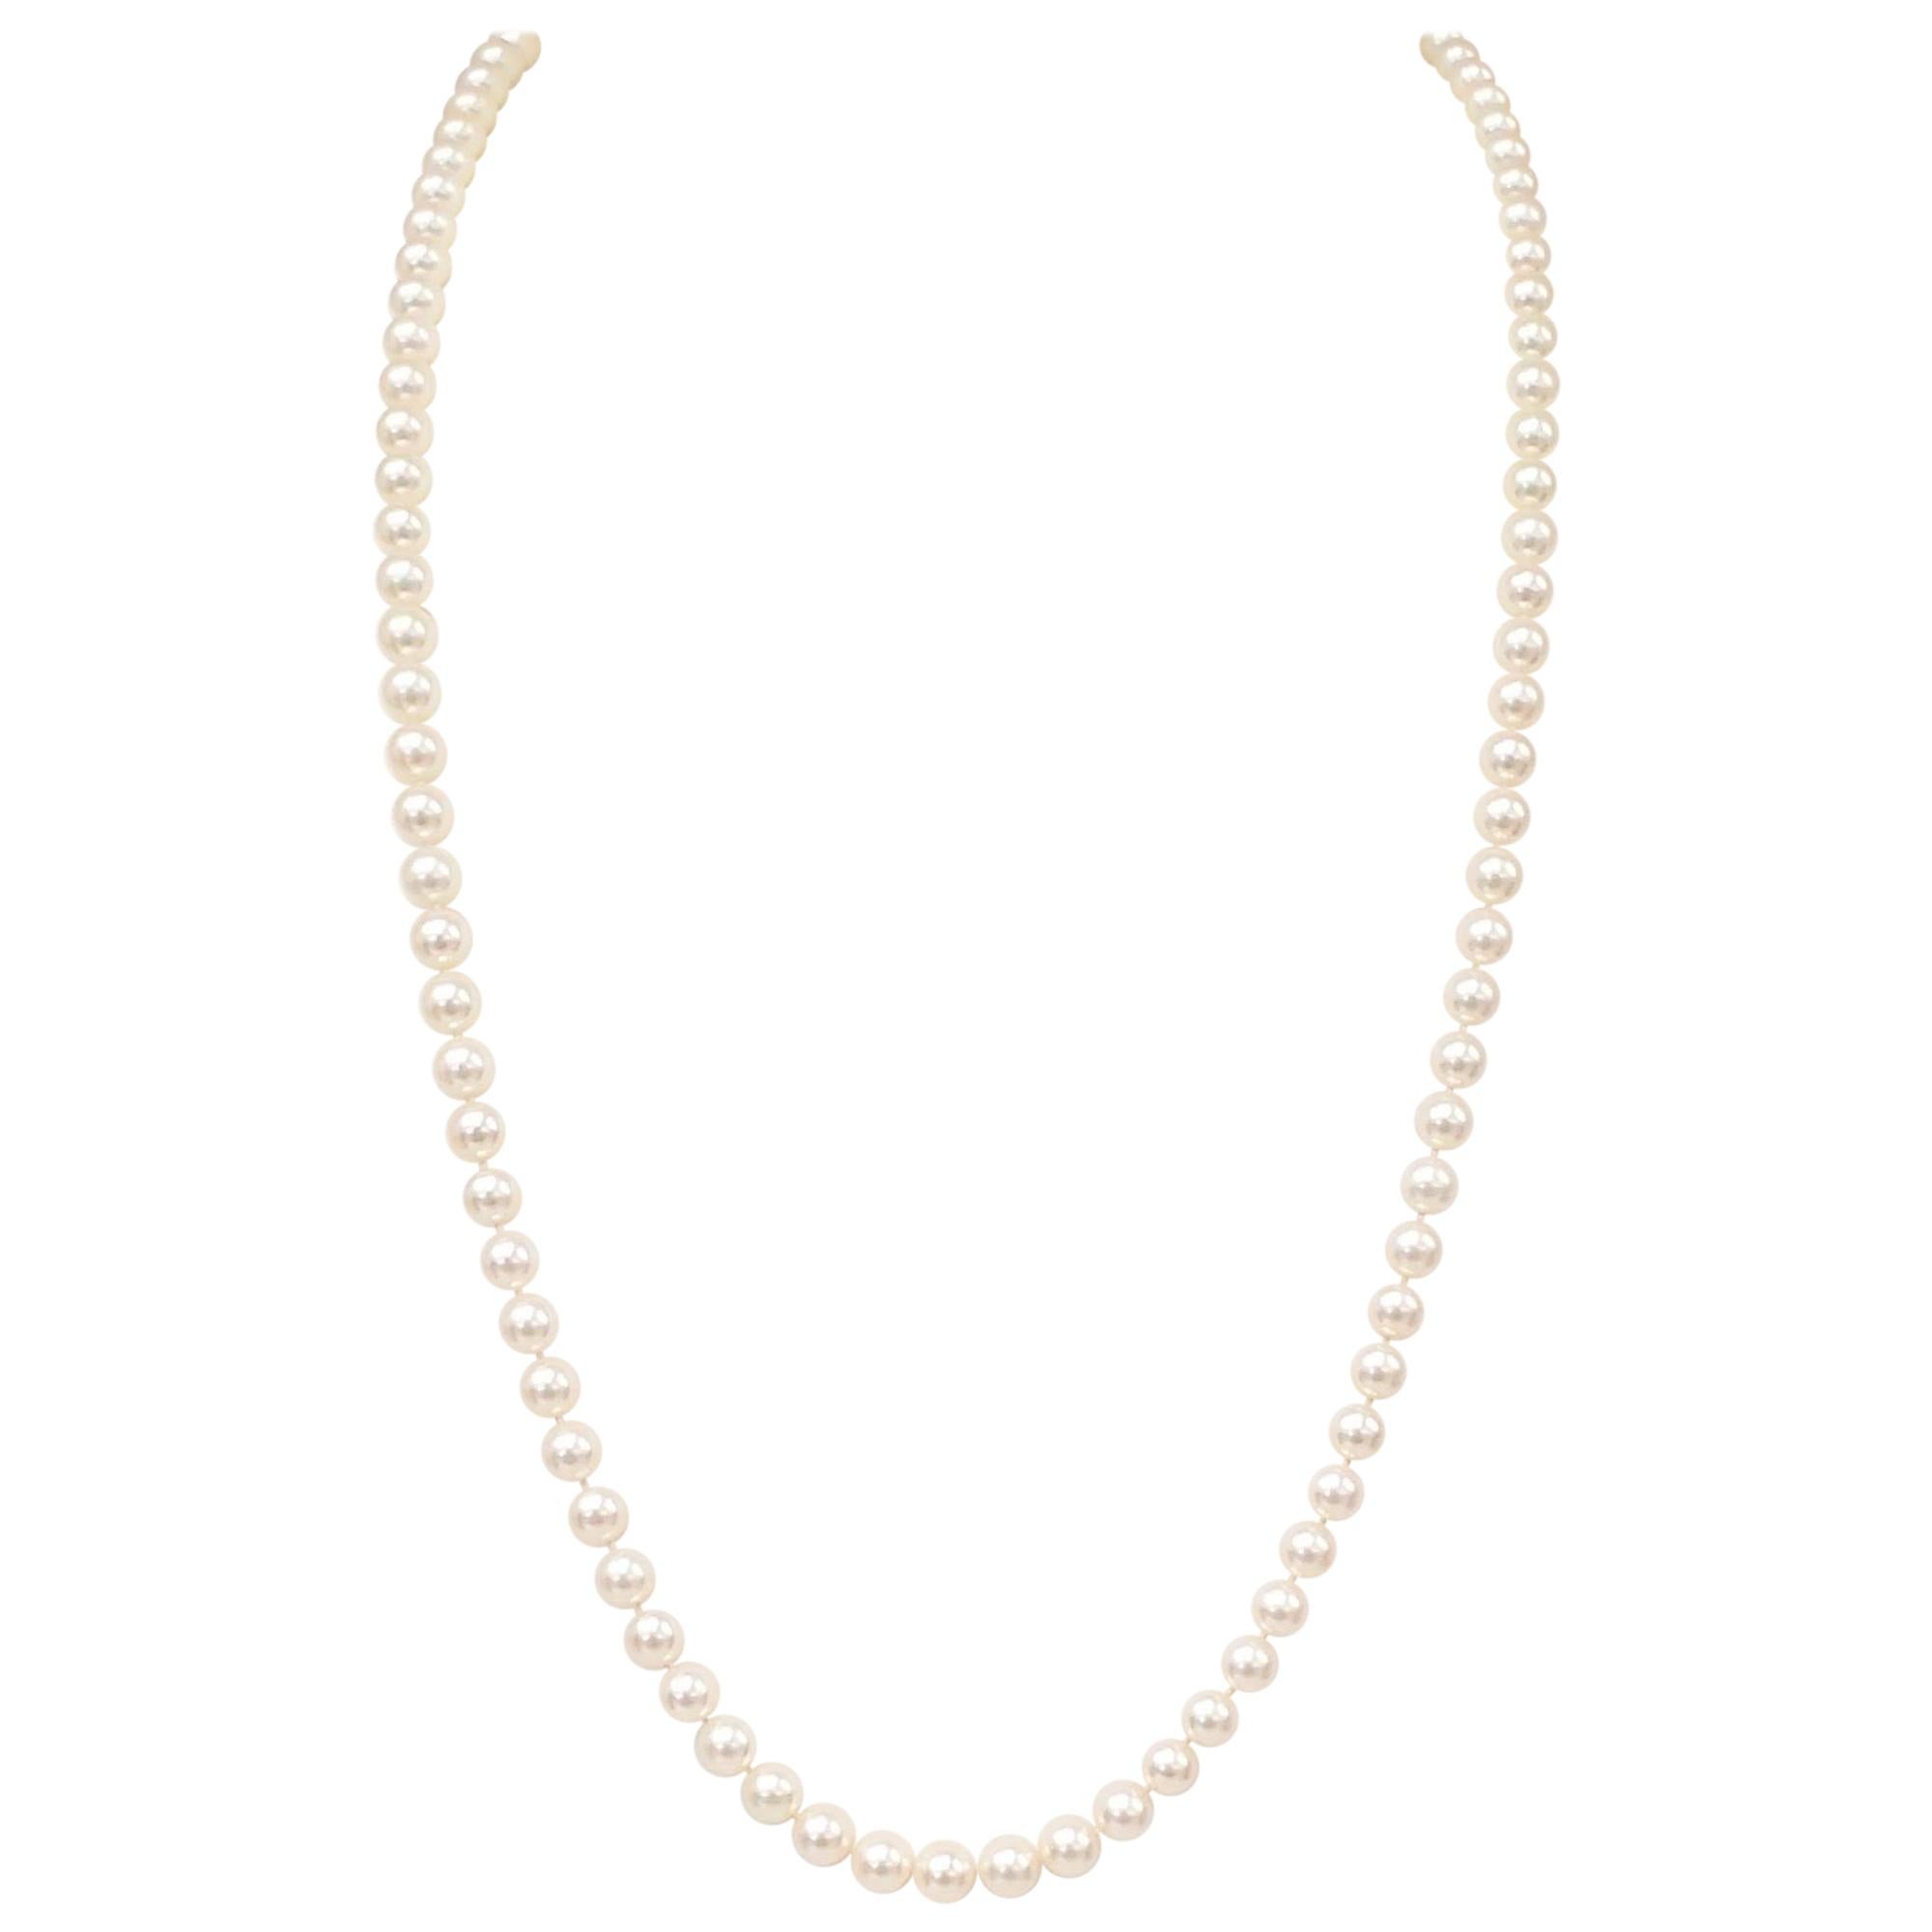 Tiffany & Co. Pearl Necklace with Platinum 'X' Clasp